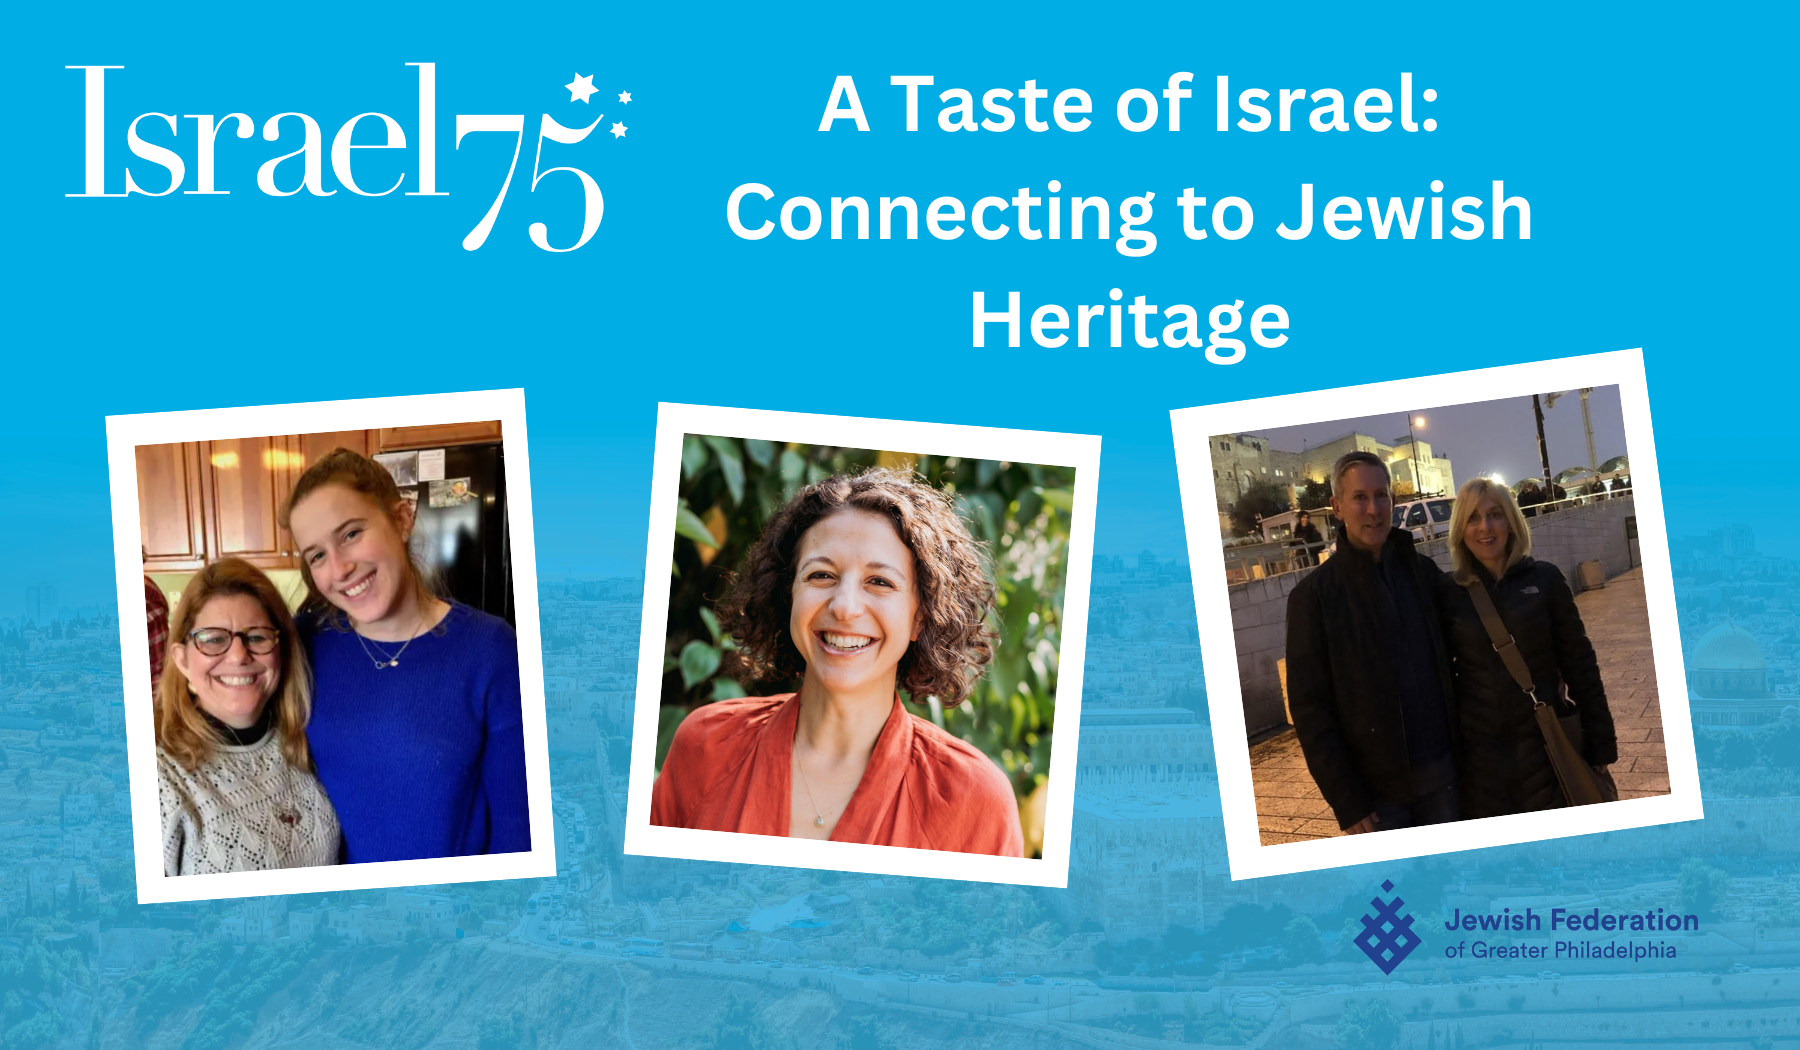 A Taste of Israel: Connecting to Jewish Heritage